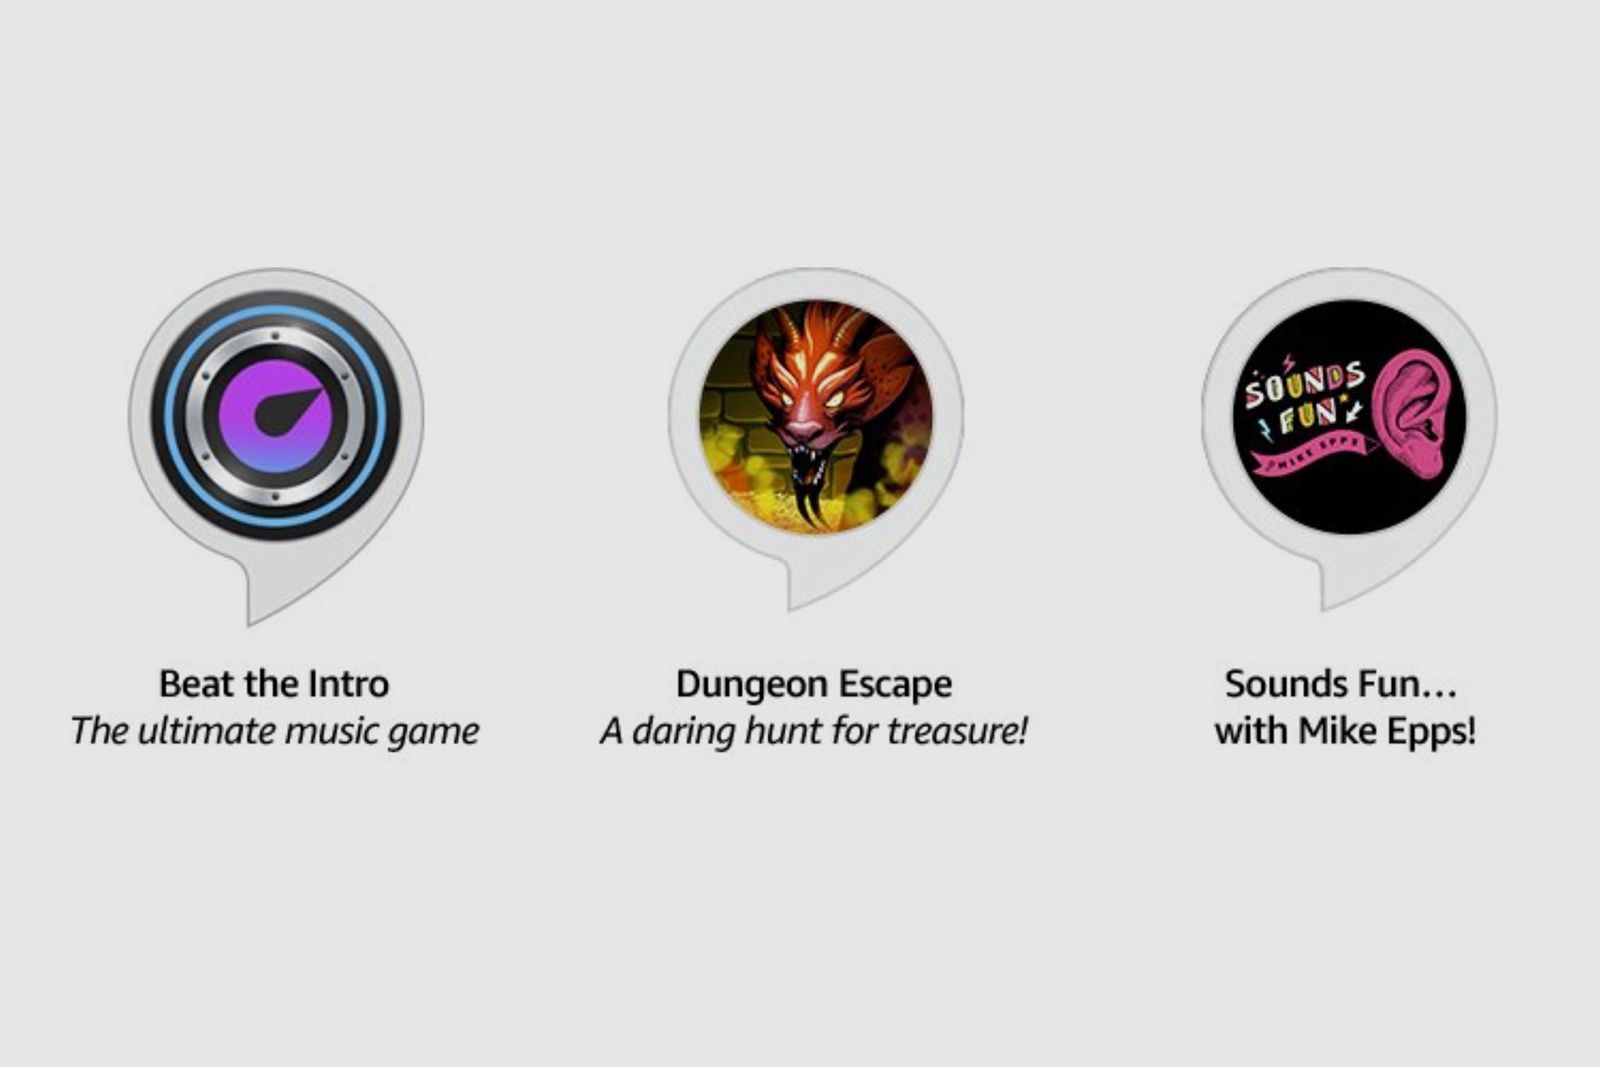 What are Amazon Echo Buttons and which games use them image 2